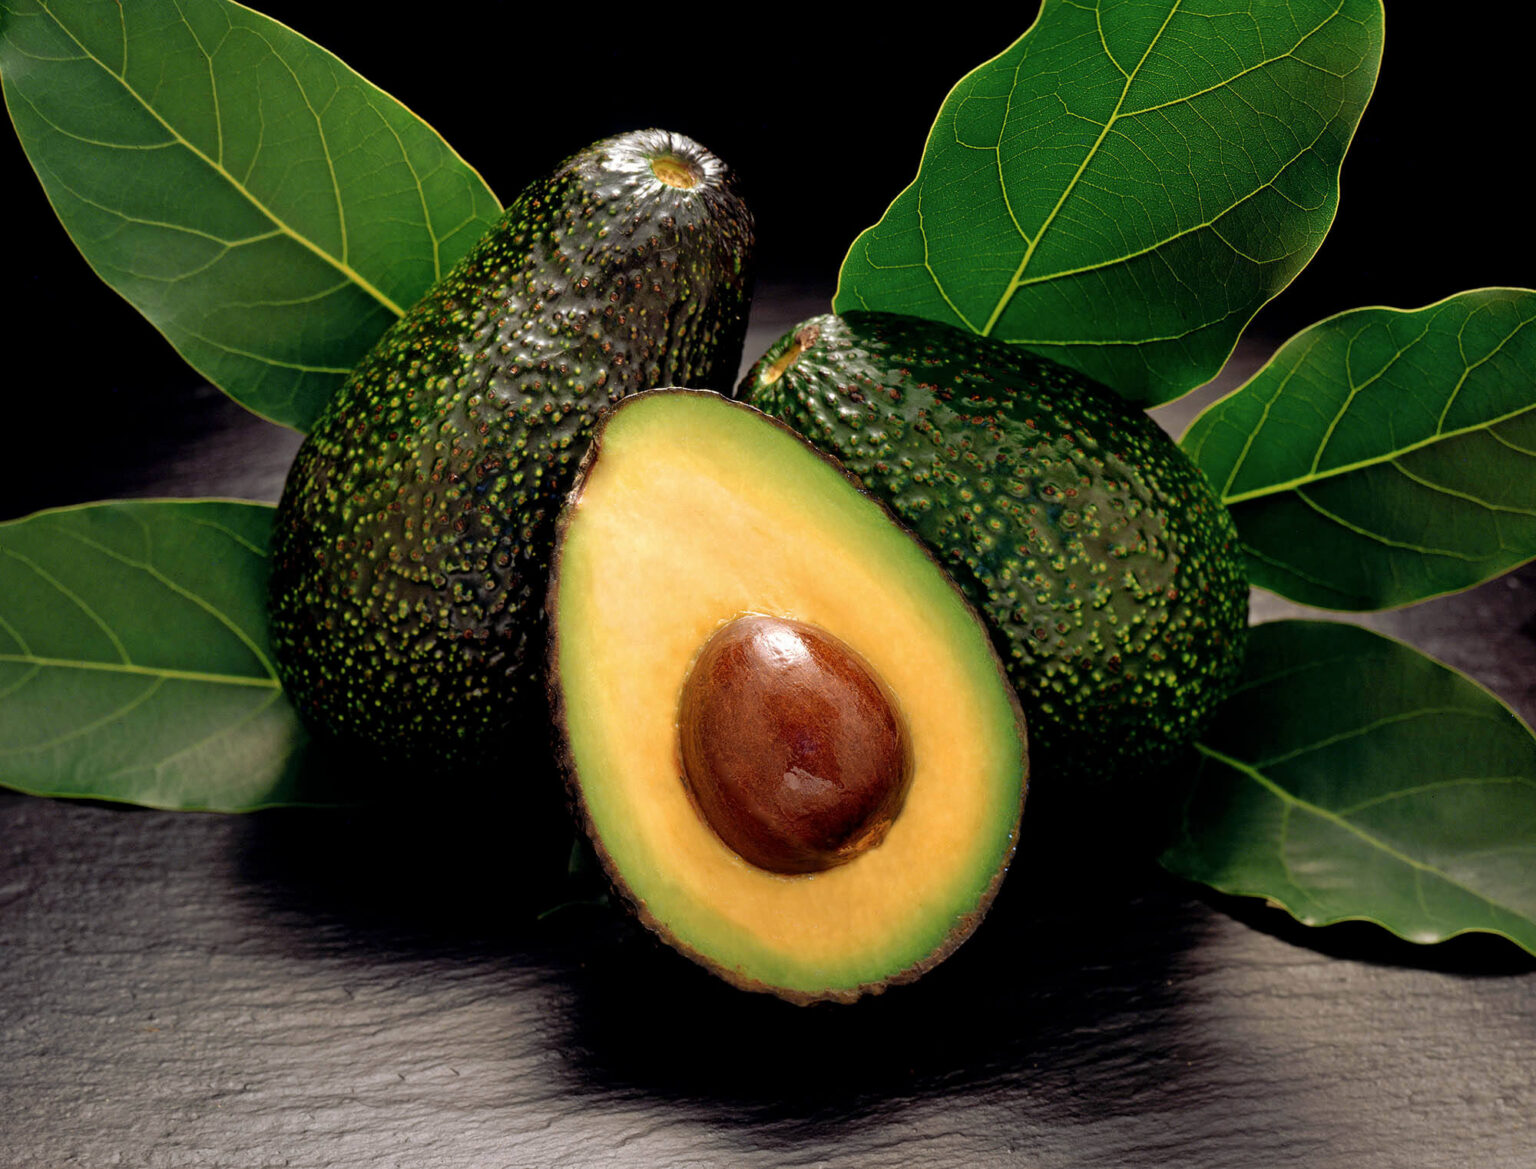 HAAS AVOCADOS photographed in the studio by Craig Lovell.